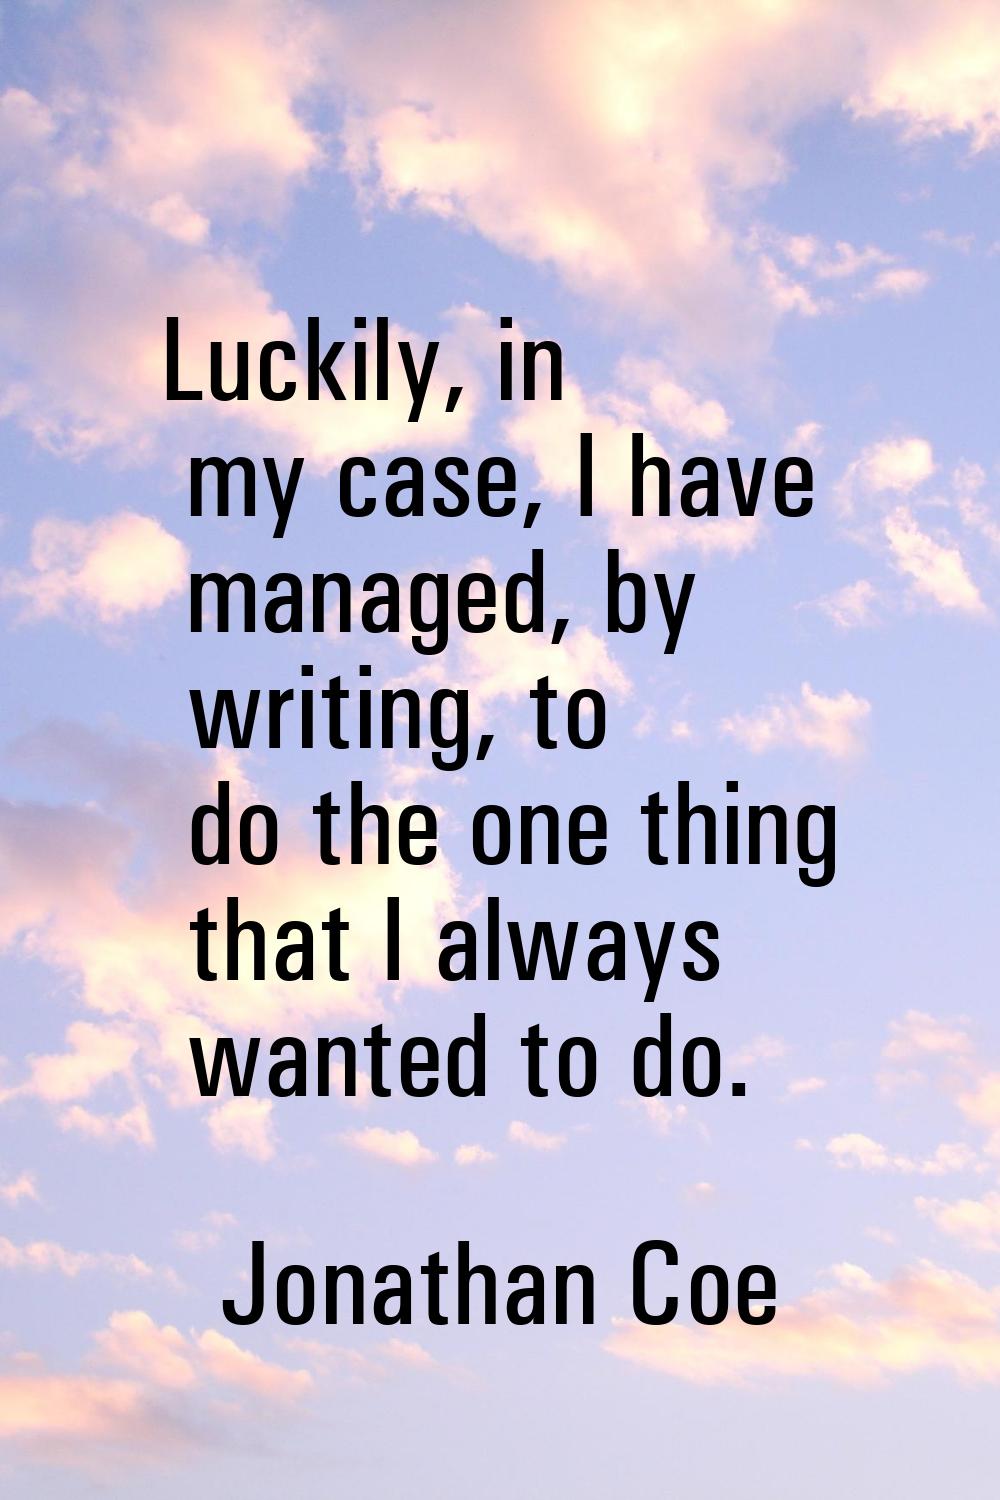 Luckily, in my case, I have managed, by writing, to do the one thing that I always wanted to do.